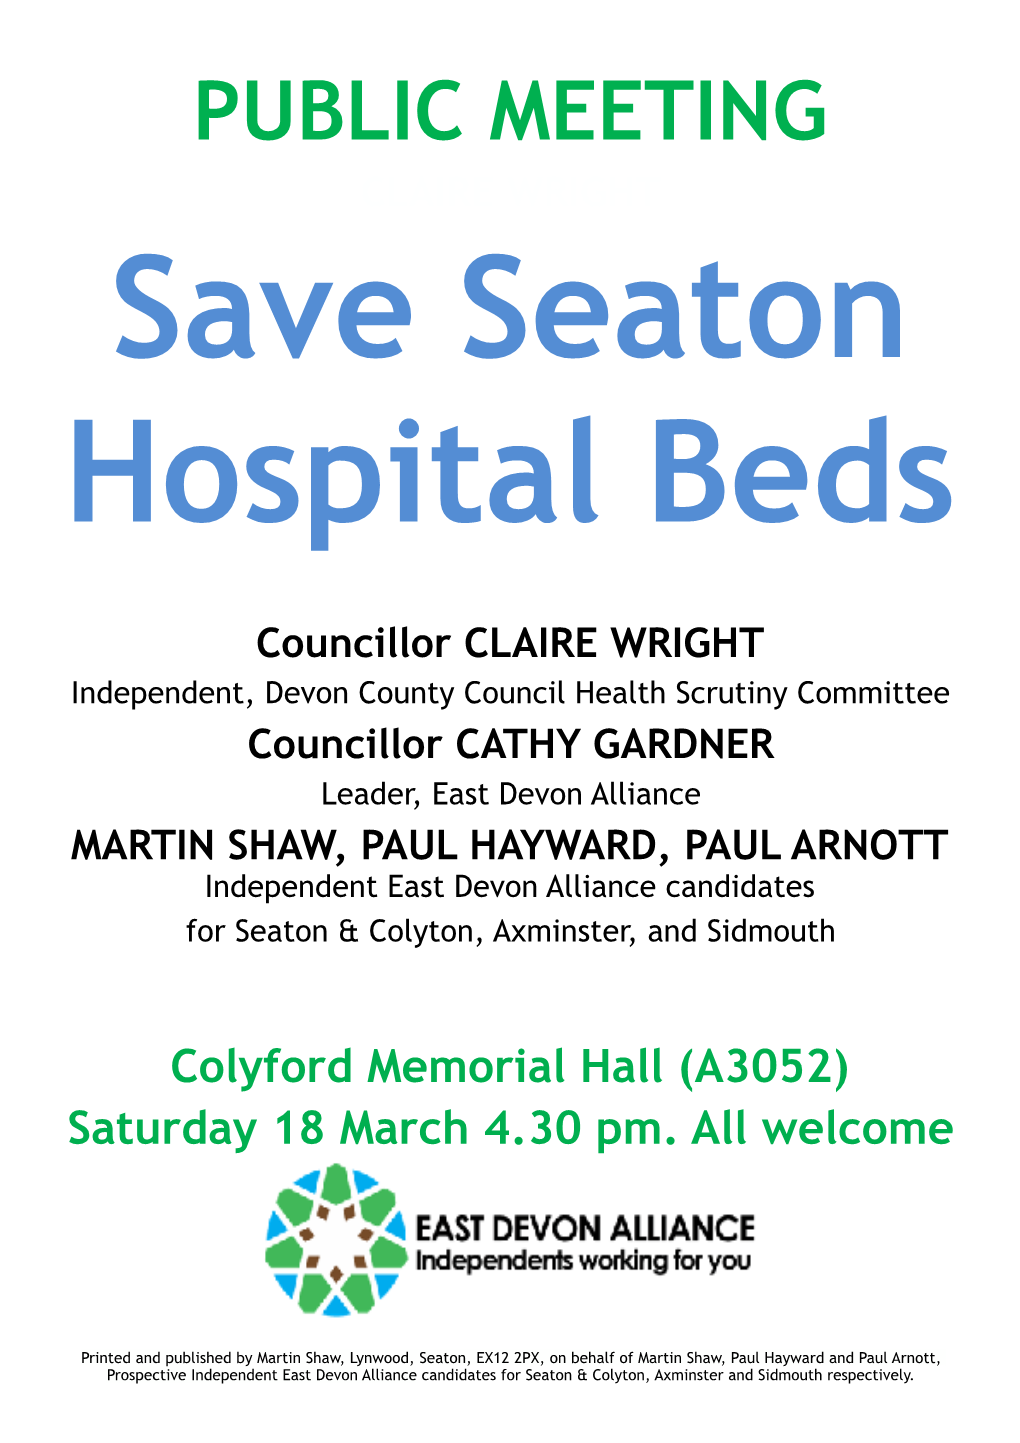 Colyford Meeting 18.3.17 Revised Poster 2